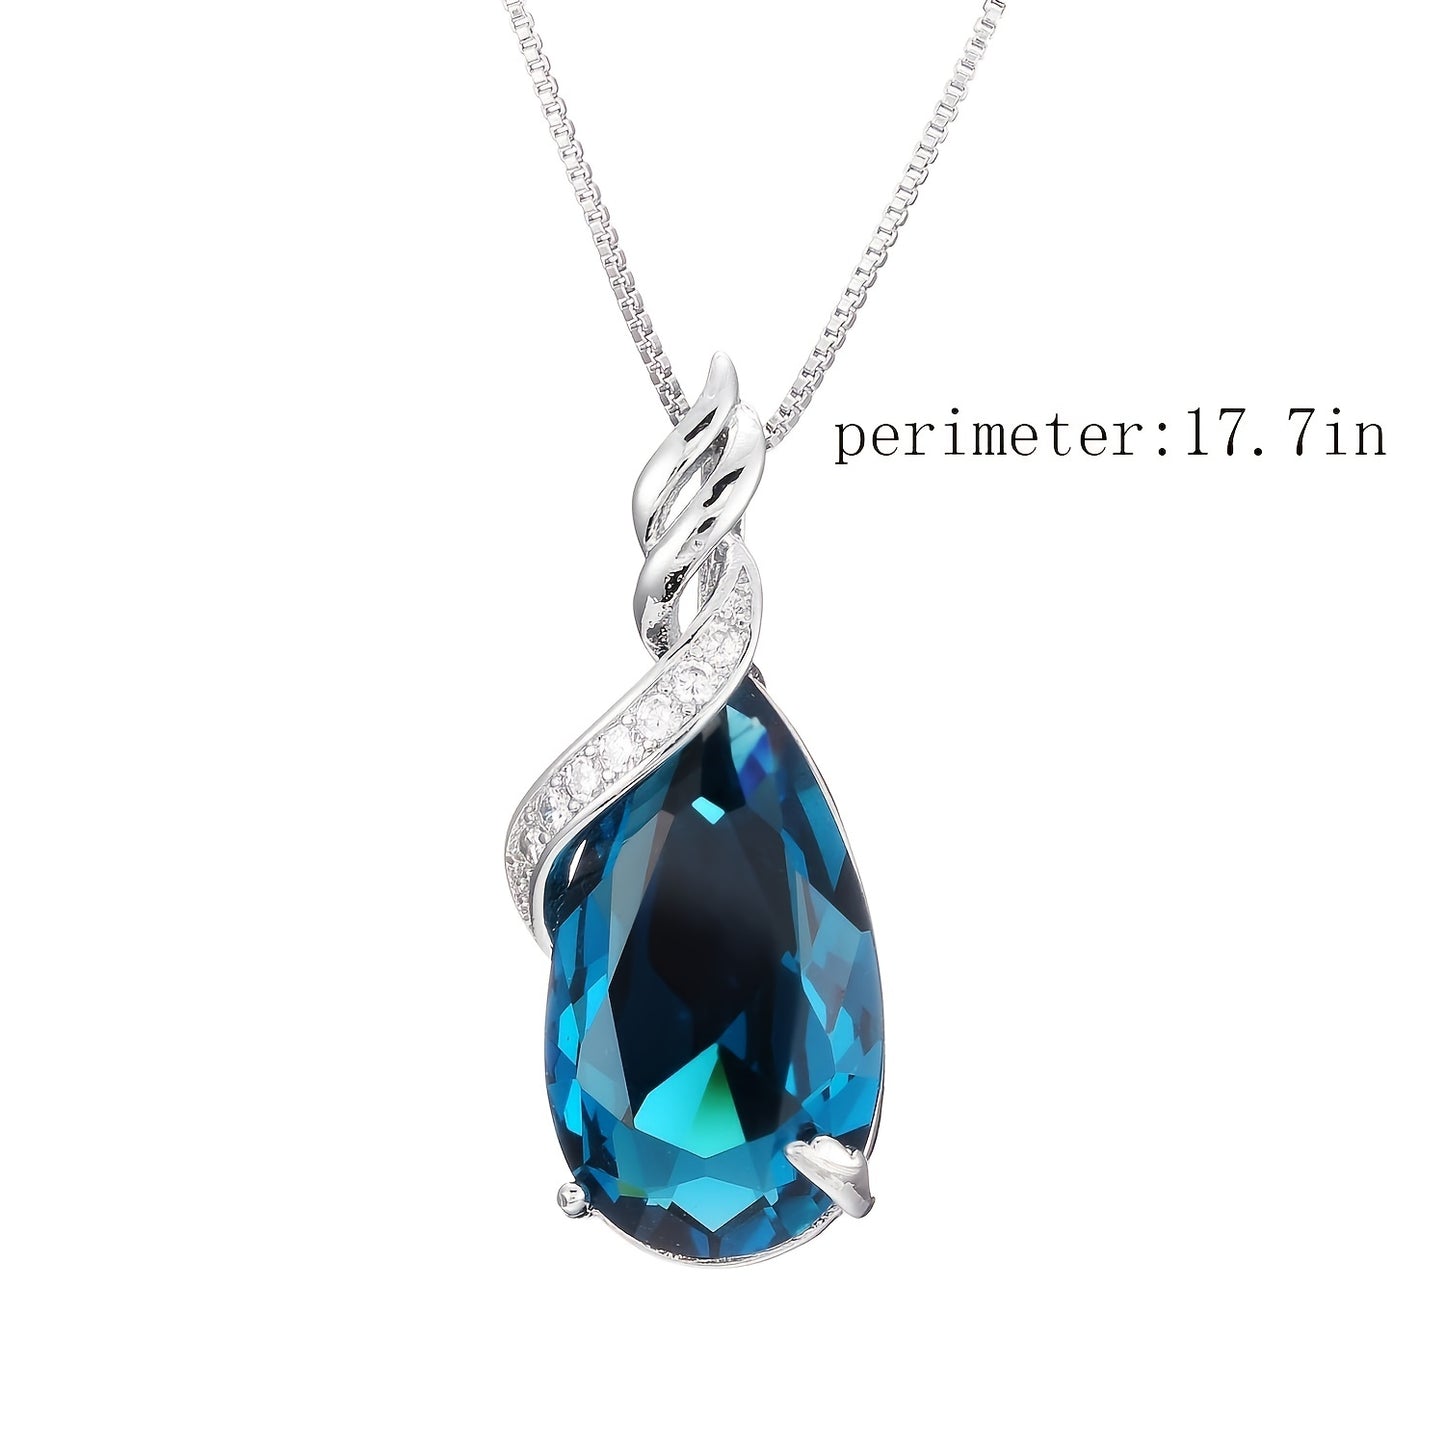 Water Drop Crystal Blue Topaz Pendant Necklace - S925 Sterling Silver